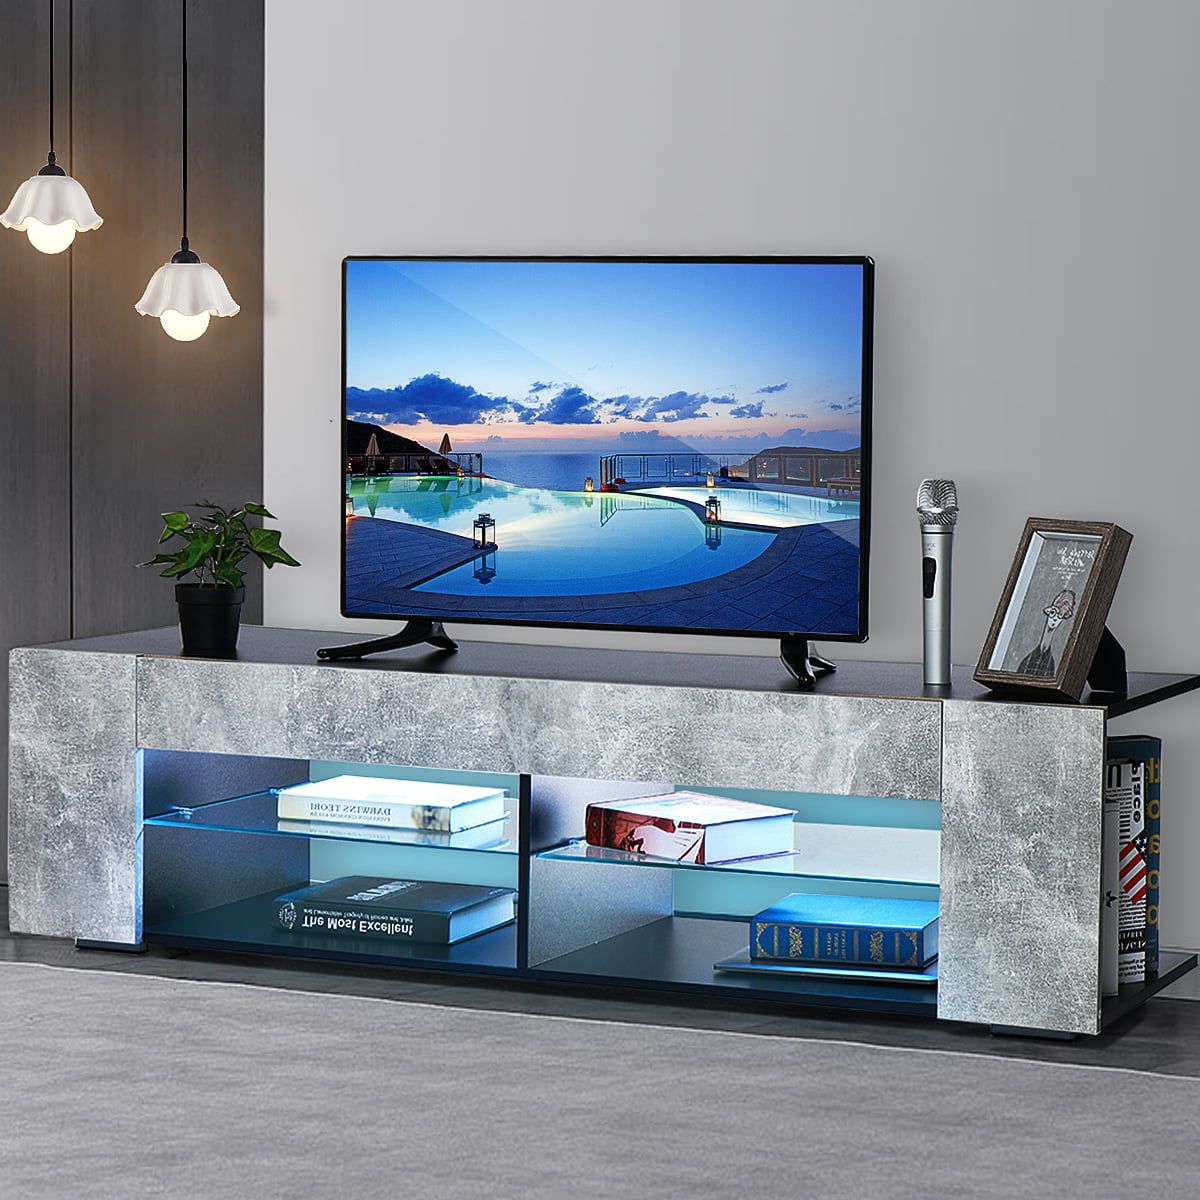 2019 Tv Stands With Lights With Regard To 57 Inch Tv Stand With Remote Led Lights, Entertainment Center For Tvs (View 3 of 15)